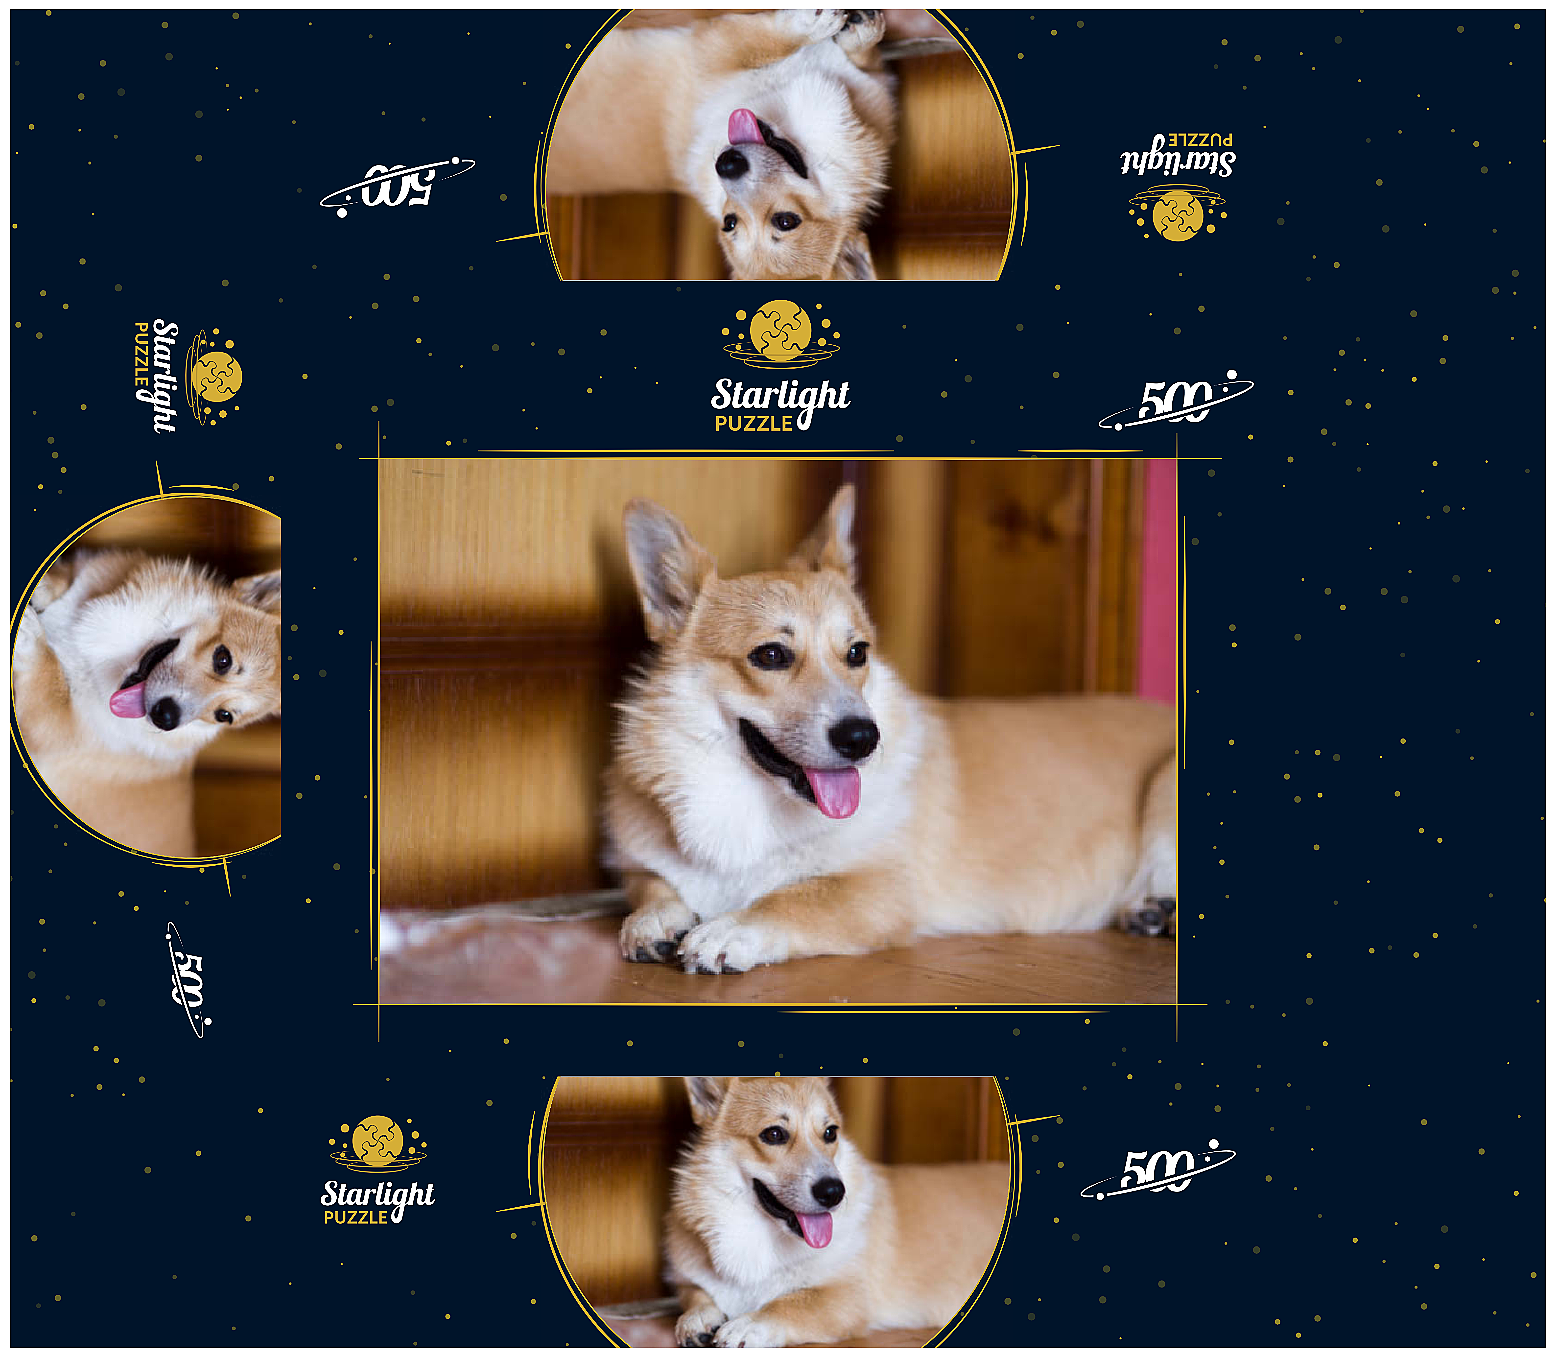 A Pembroke Welsh Corgi Dog Owned by Queen Elizabeth II – MyPuzzle.com USA